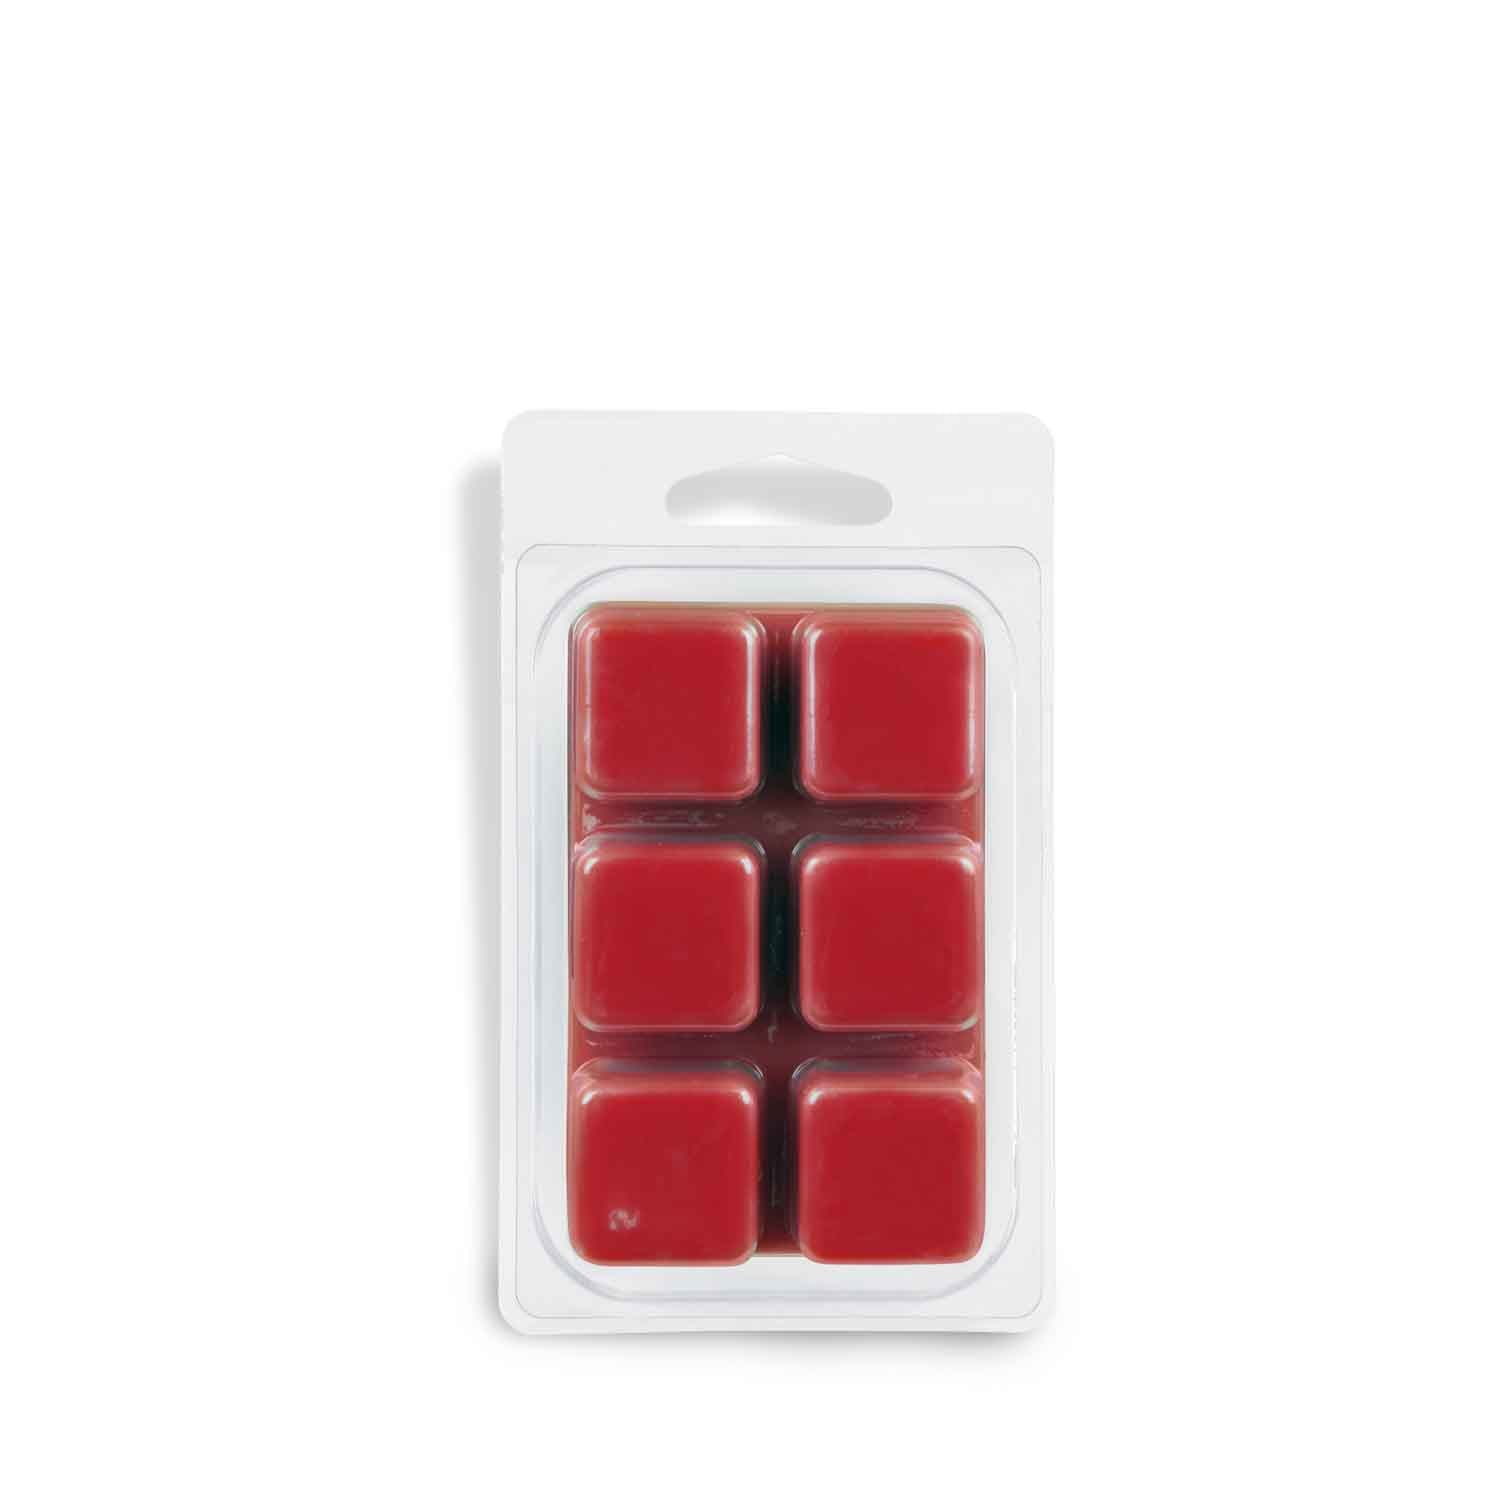 A pack of Tuscany Candle® Cinnamon Scented Wax Melt (2.5 oz) cubes on a white background.